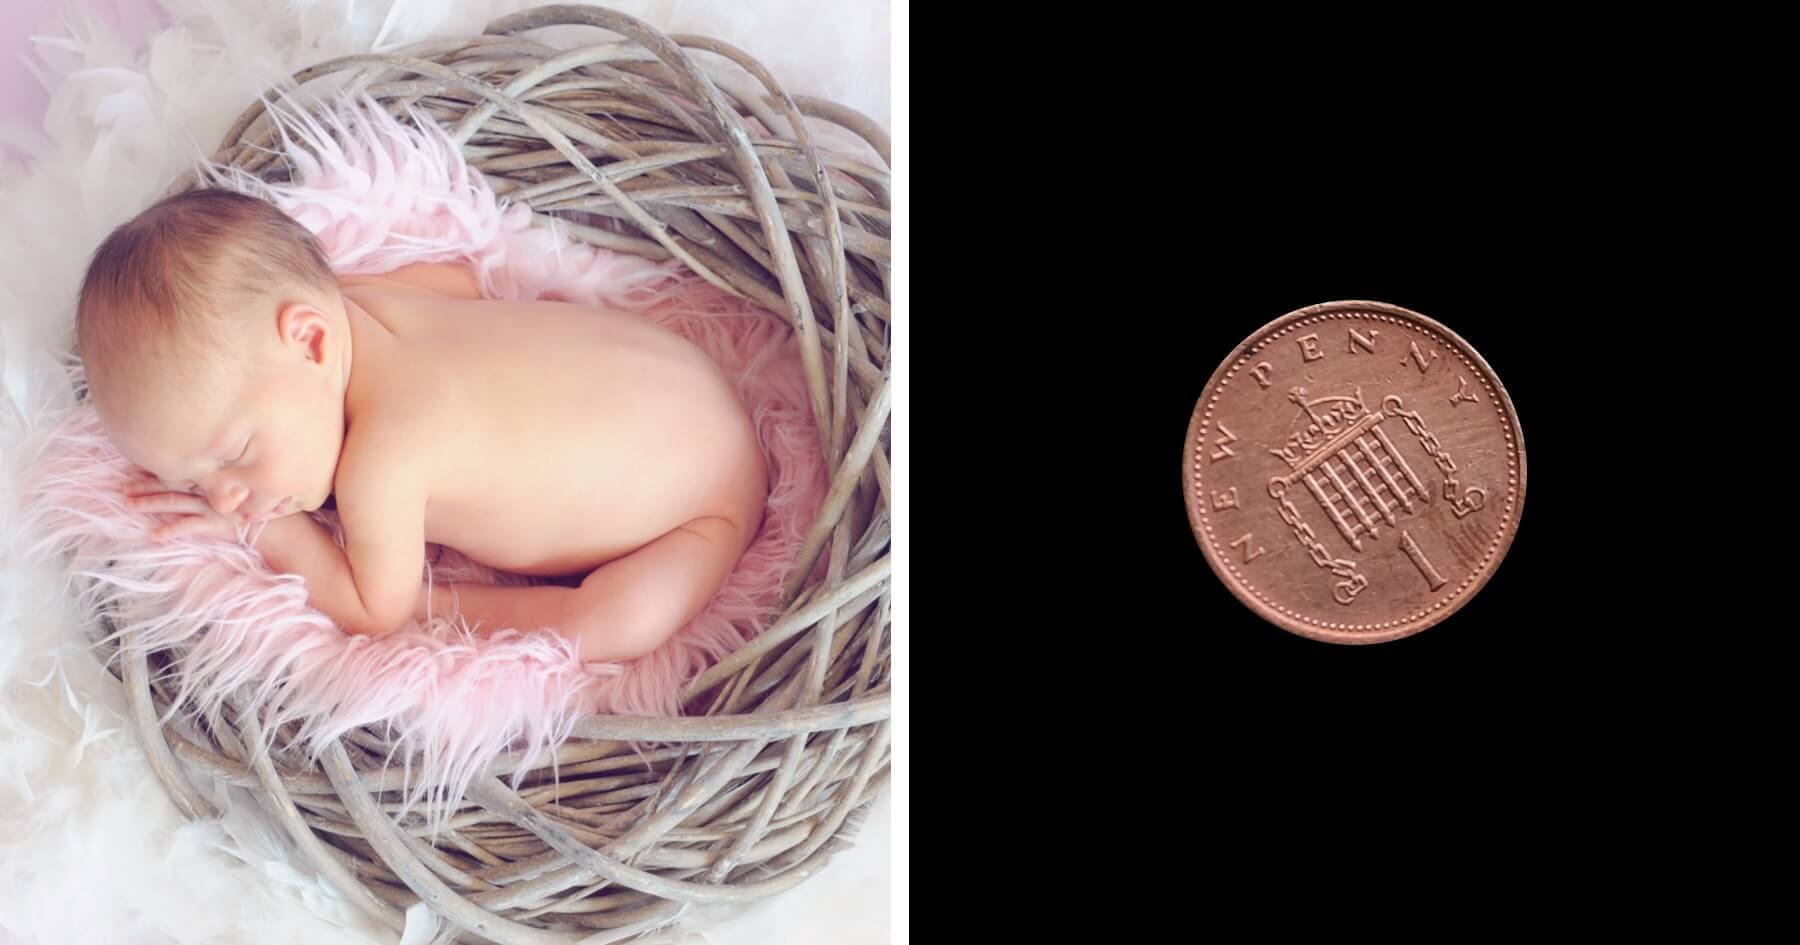 Girl born two days after abortion limit with feet size of penny now flourishing in primary school